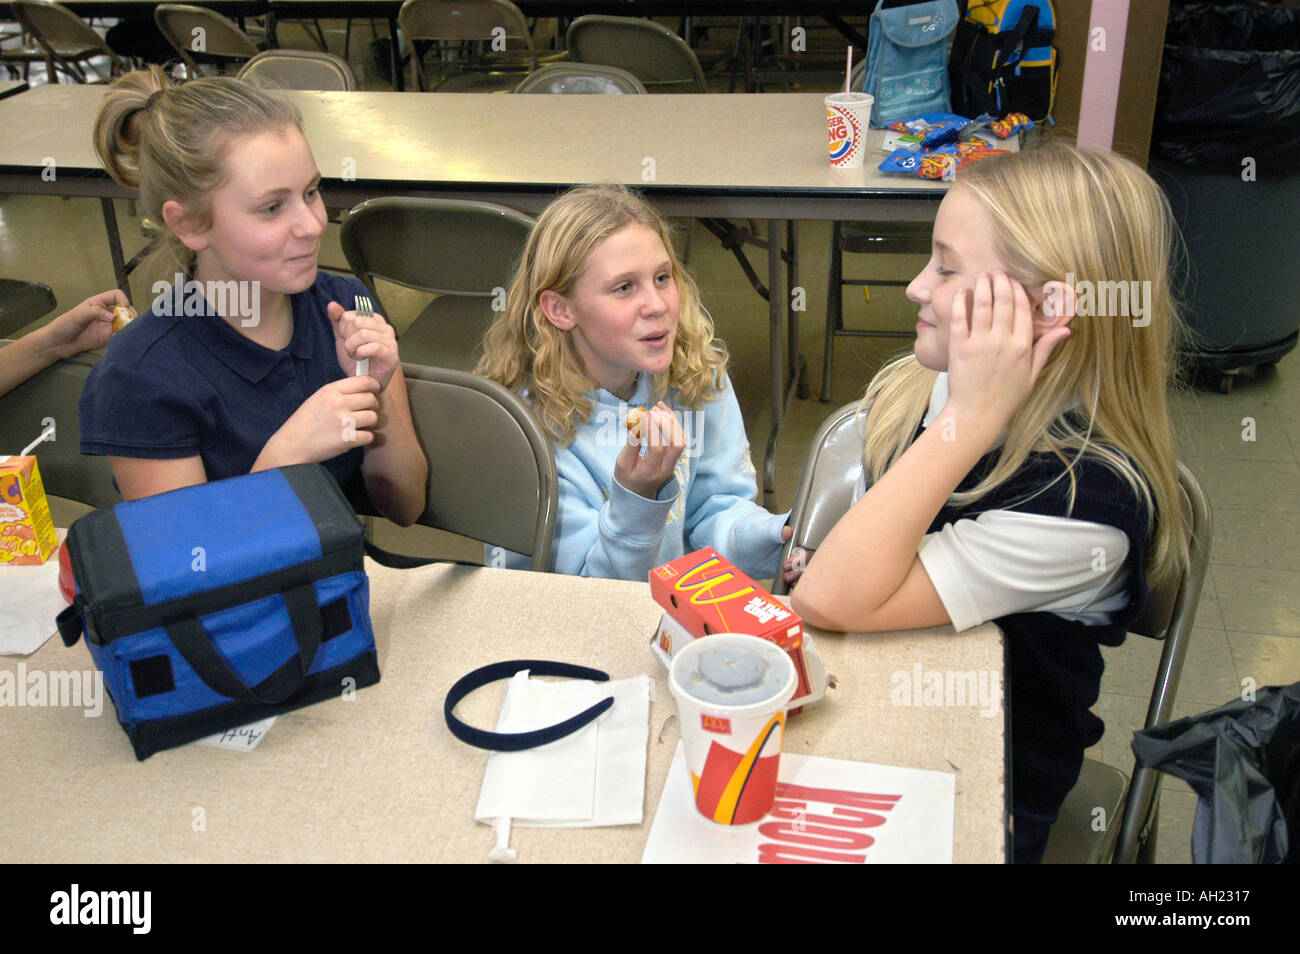 Girls socialize during lunch hour at school cafeteria Stock Photo